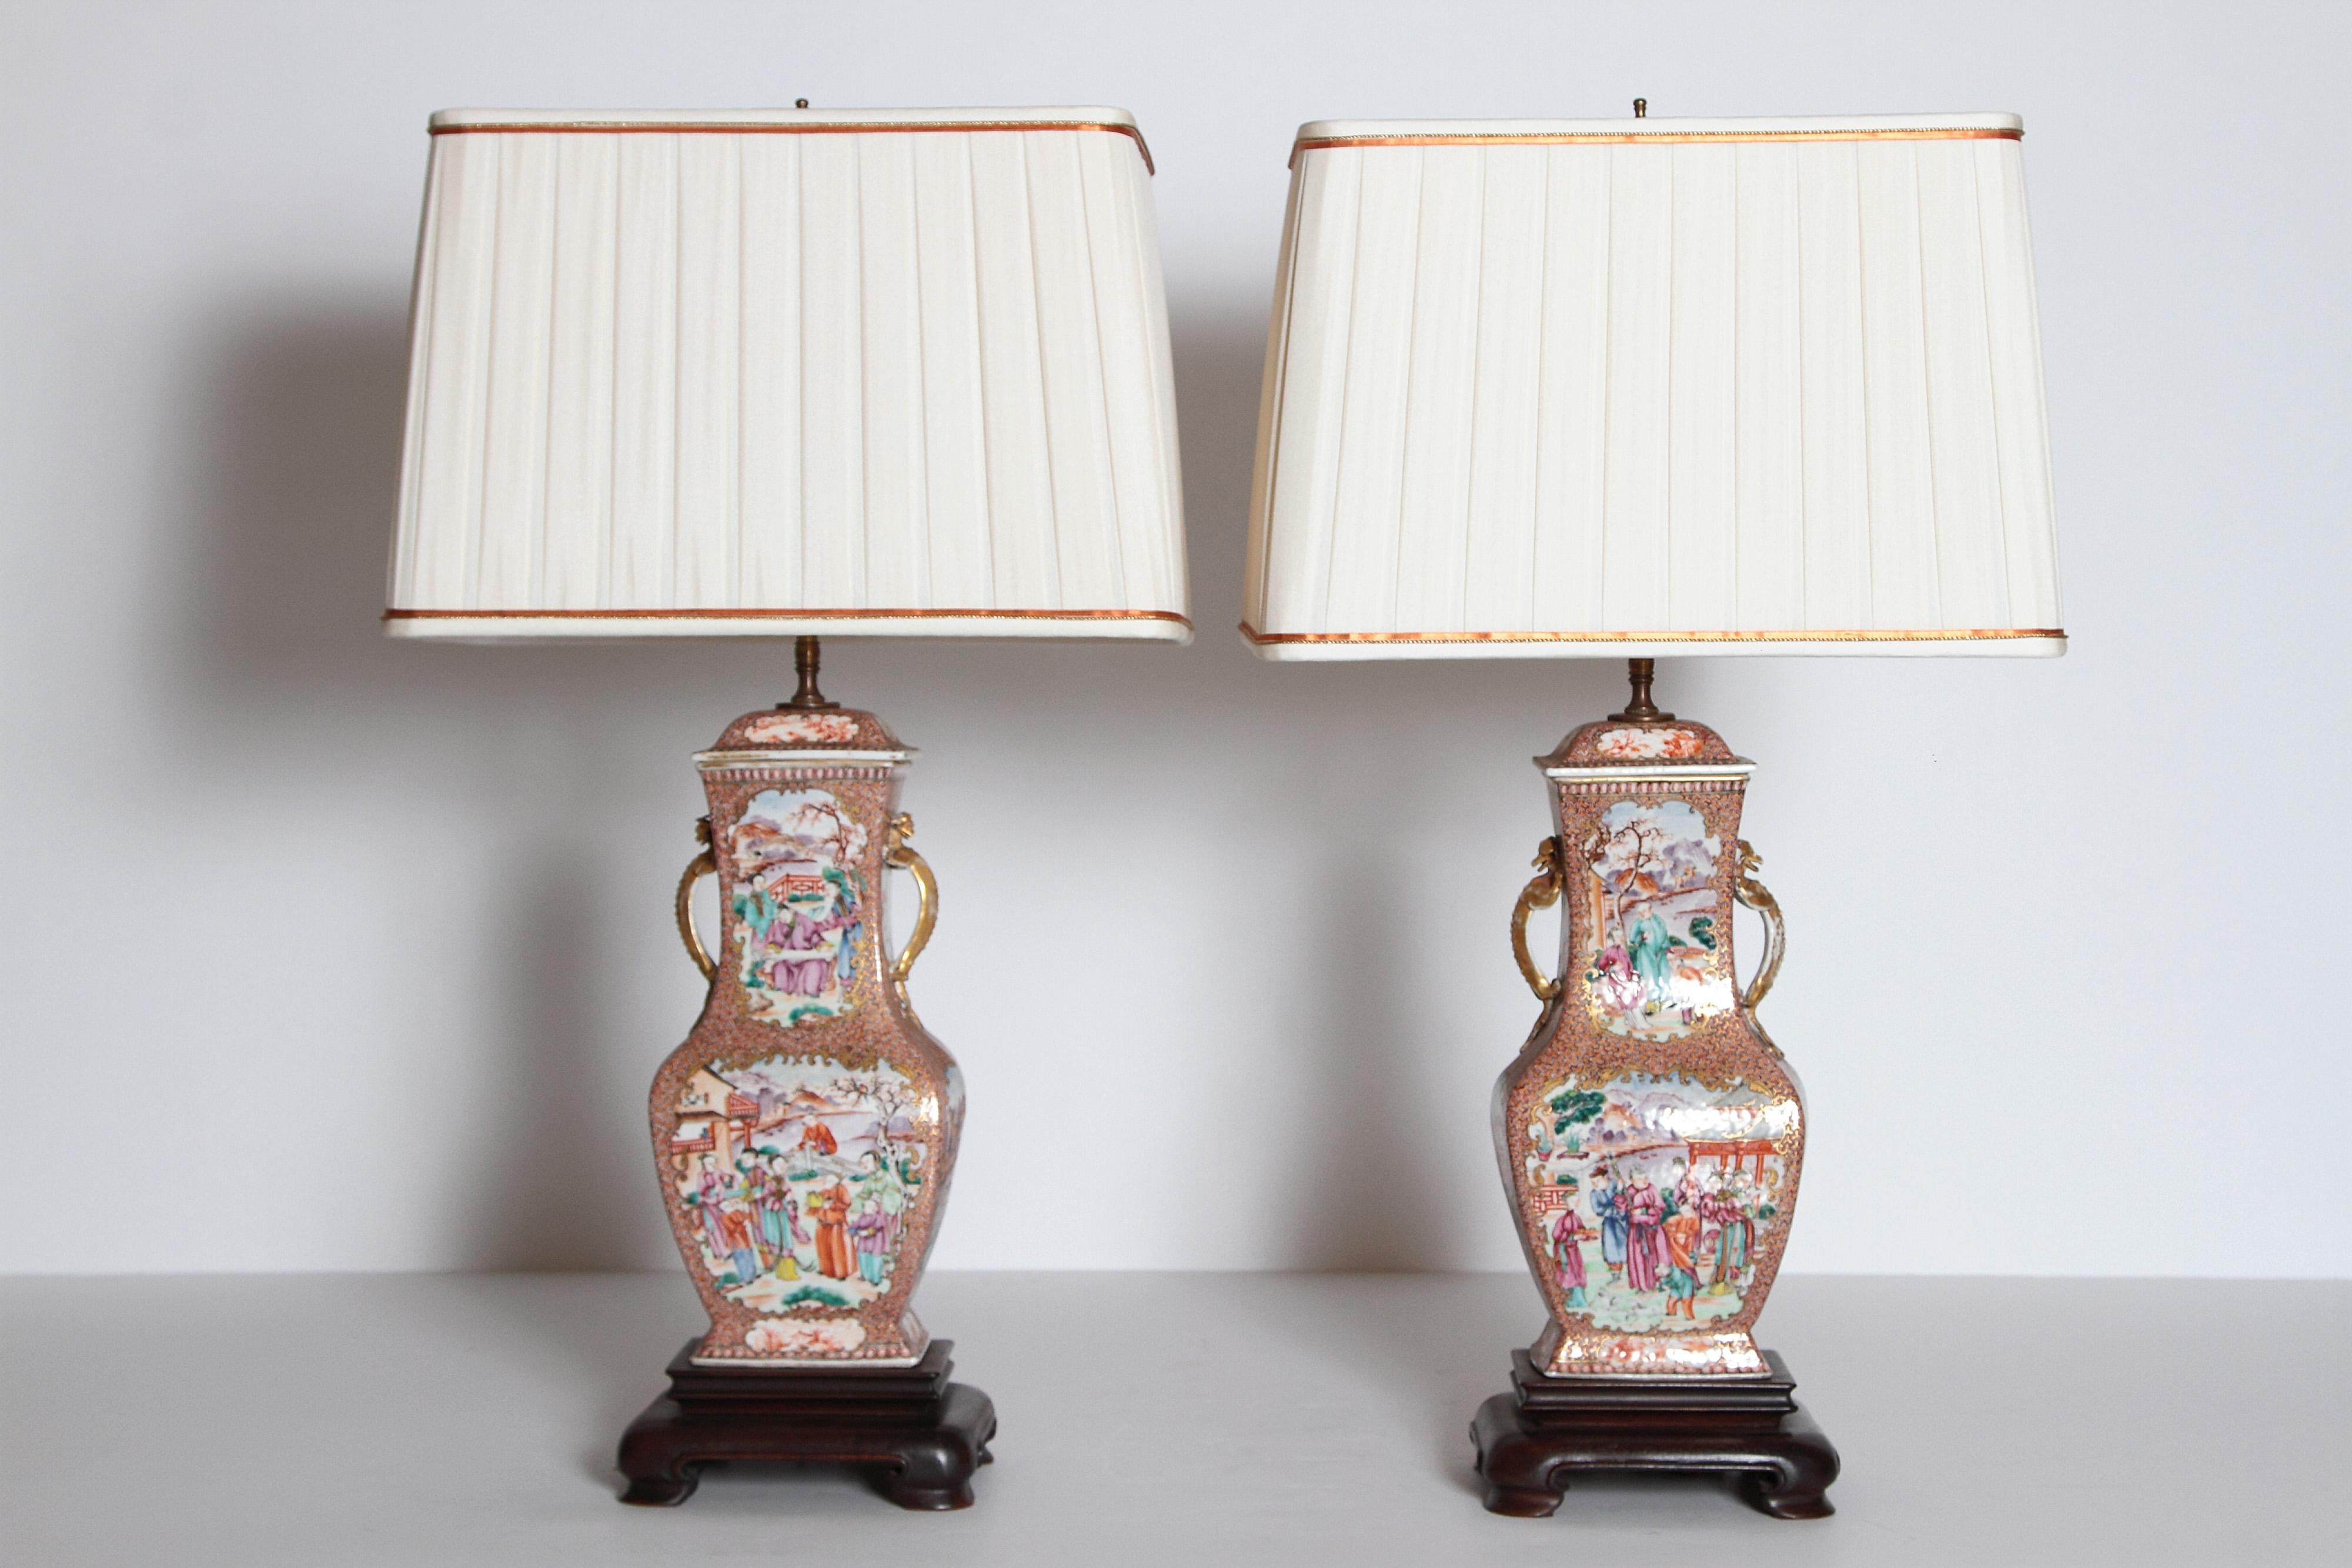 A pair of Chinese Export Rose Mandarin porcelain jars with lids as lamps. All four side have painted panels with people in landscapes on orange and gilt patterned background. A pair of gold lizards at the neck. Jars have been set on rectangular